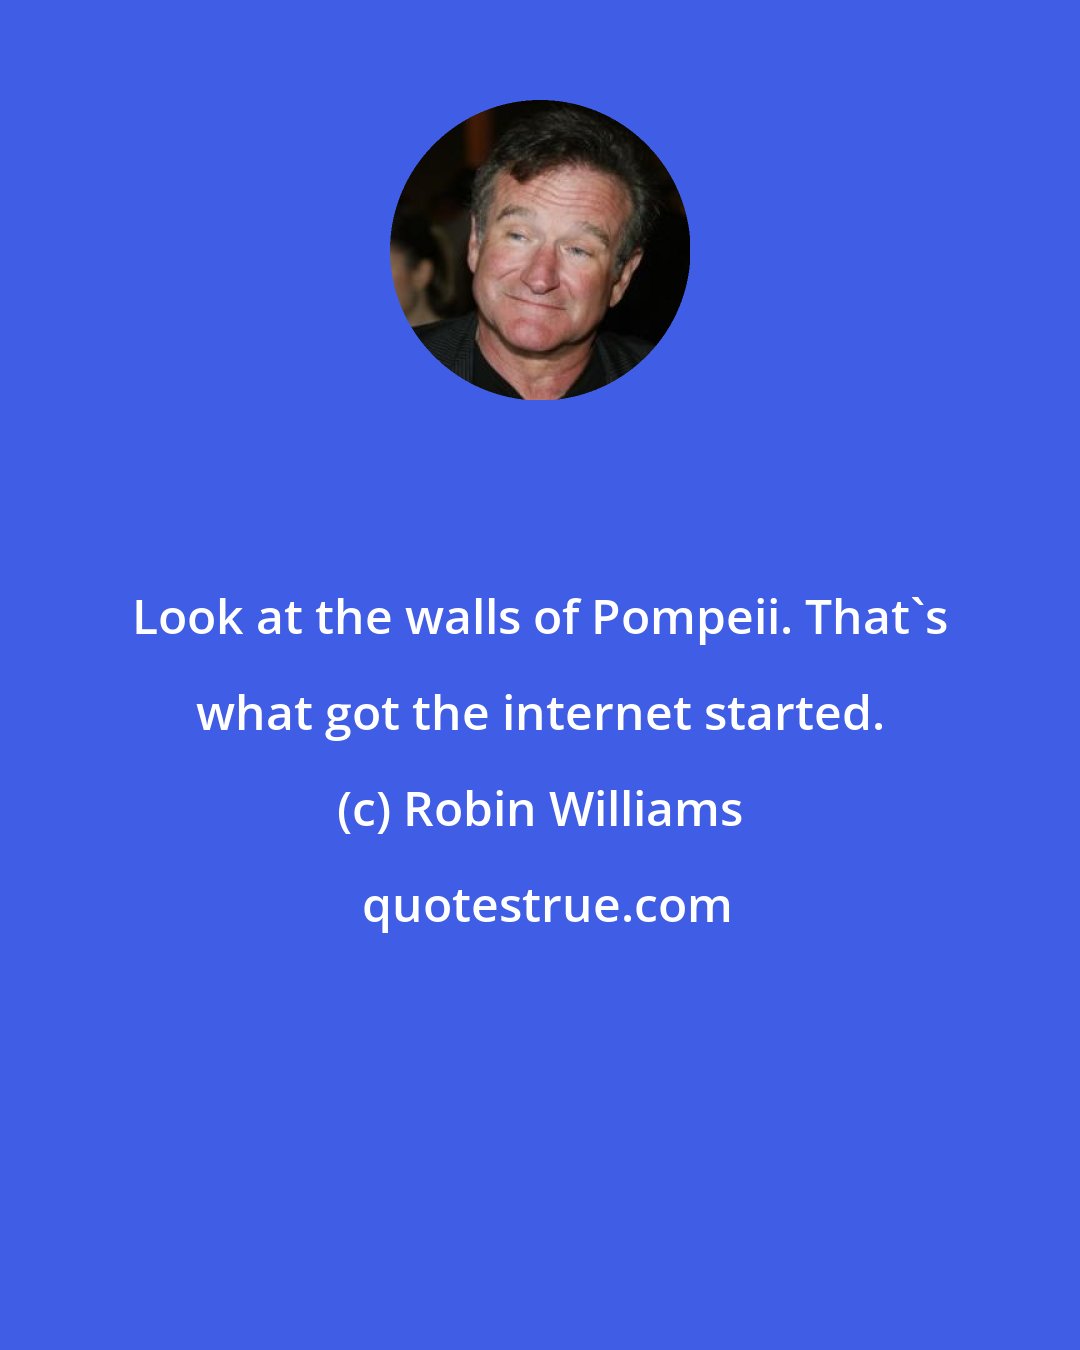 Robin Williams: Look at the walls of Pompeii. That's what got the internet started.